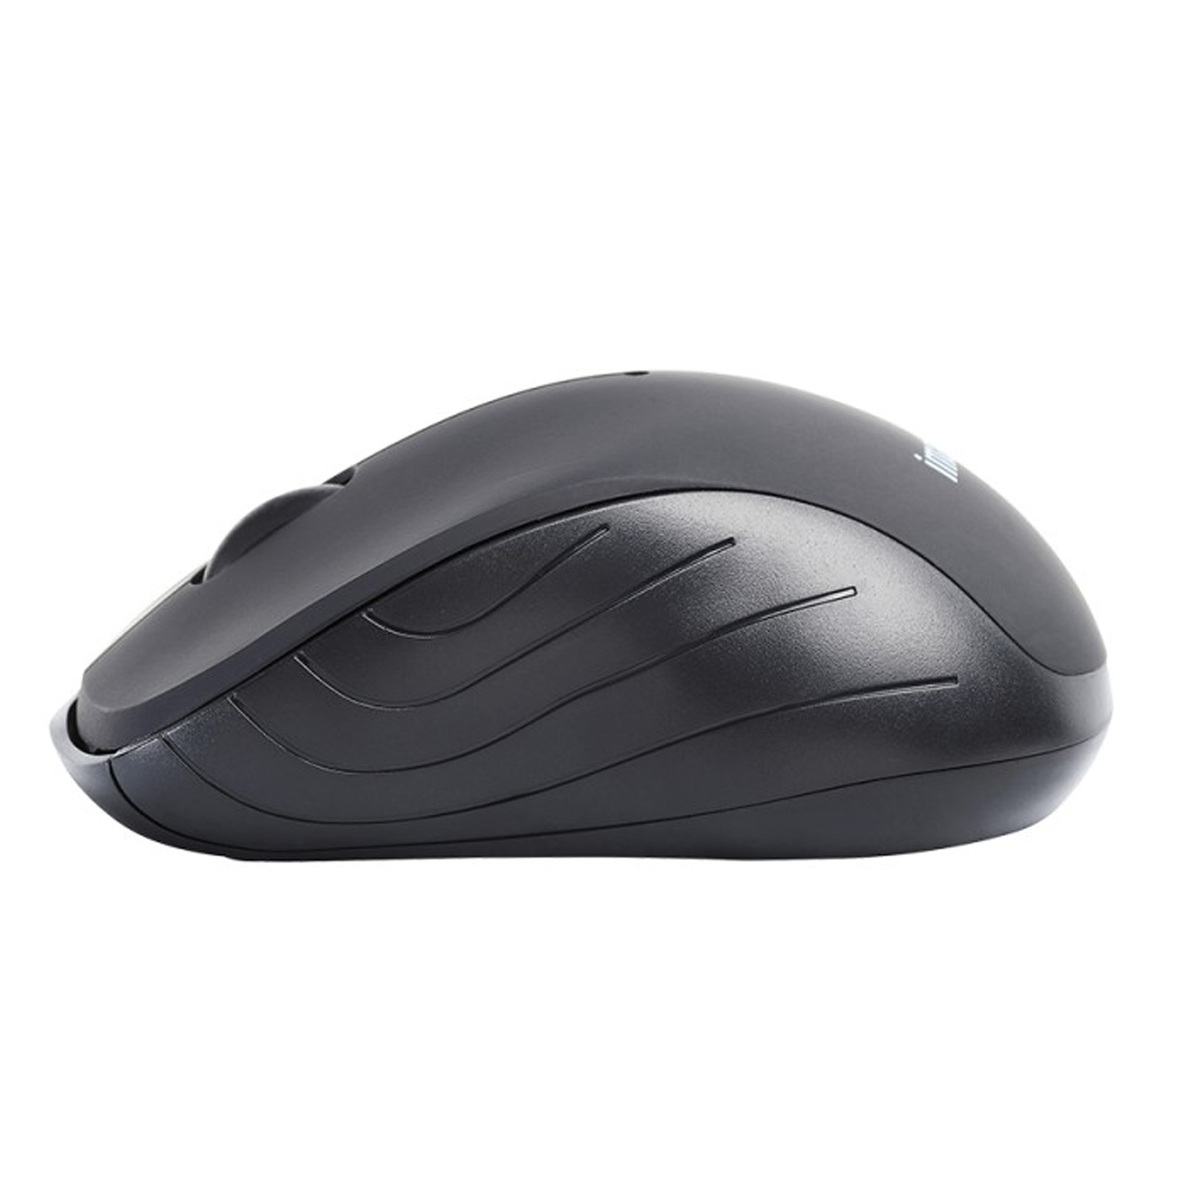 Imation Wireless Mouse WIMO3D